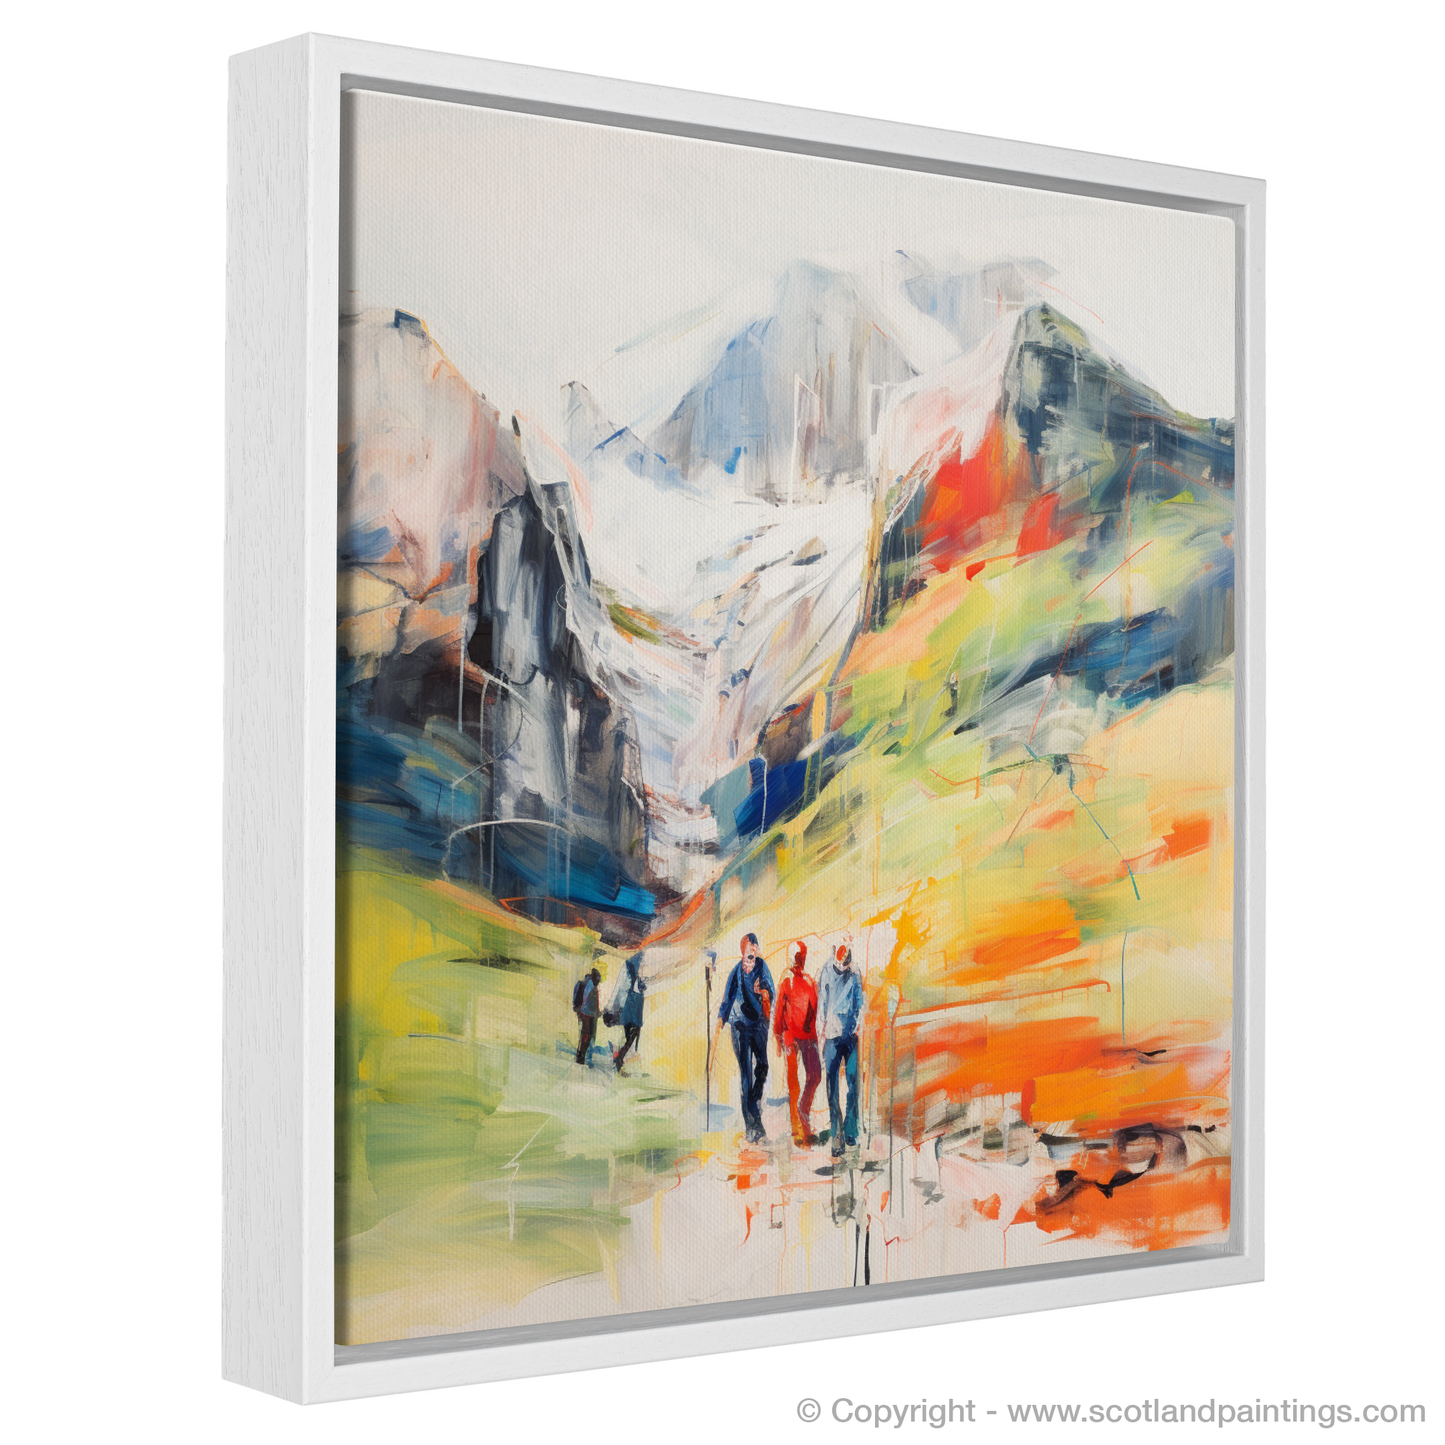 Painting and Art Print of Hikers in Glencoe entitled "Hikers' Jubilee in Vibrant Glencoe".